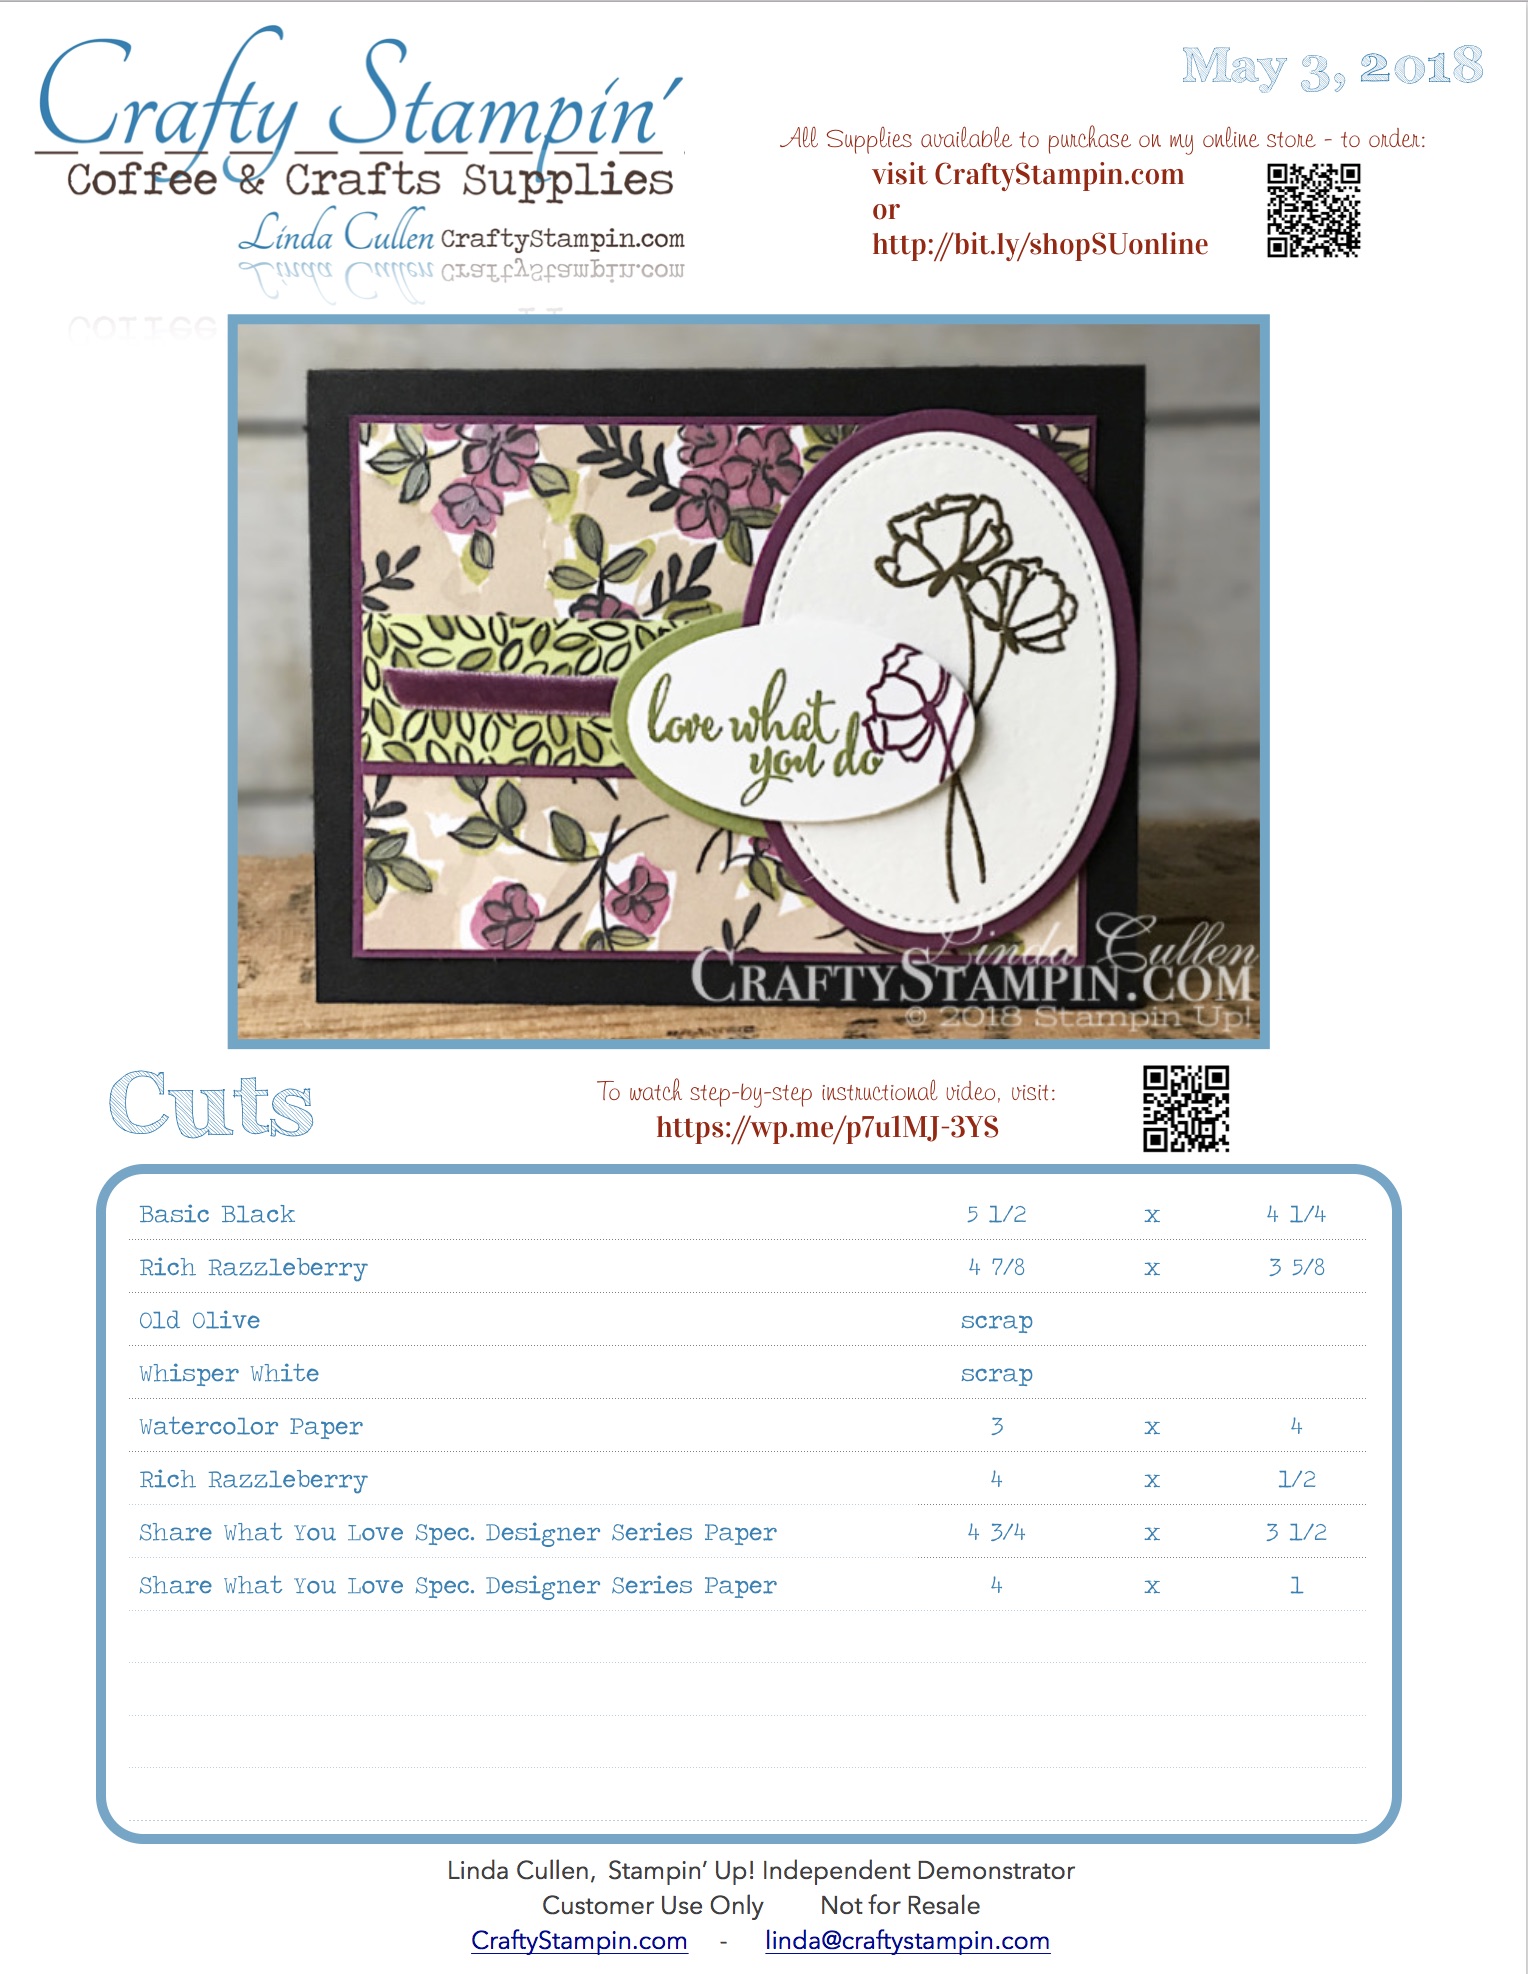 Coffee & Crafts Class: Share What You Love | Stampin Up Demonstrator Linda Cullen | Crafty Stampin’ | Purchase your Stampin’ Up Supplies | Share What You Love Gotta Have It All Bundle | Stitched Shapes Framelits Dies | Layering Ovals Framelits Dies | Stamparatus | Gold Embossing Powder